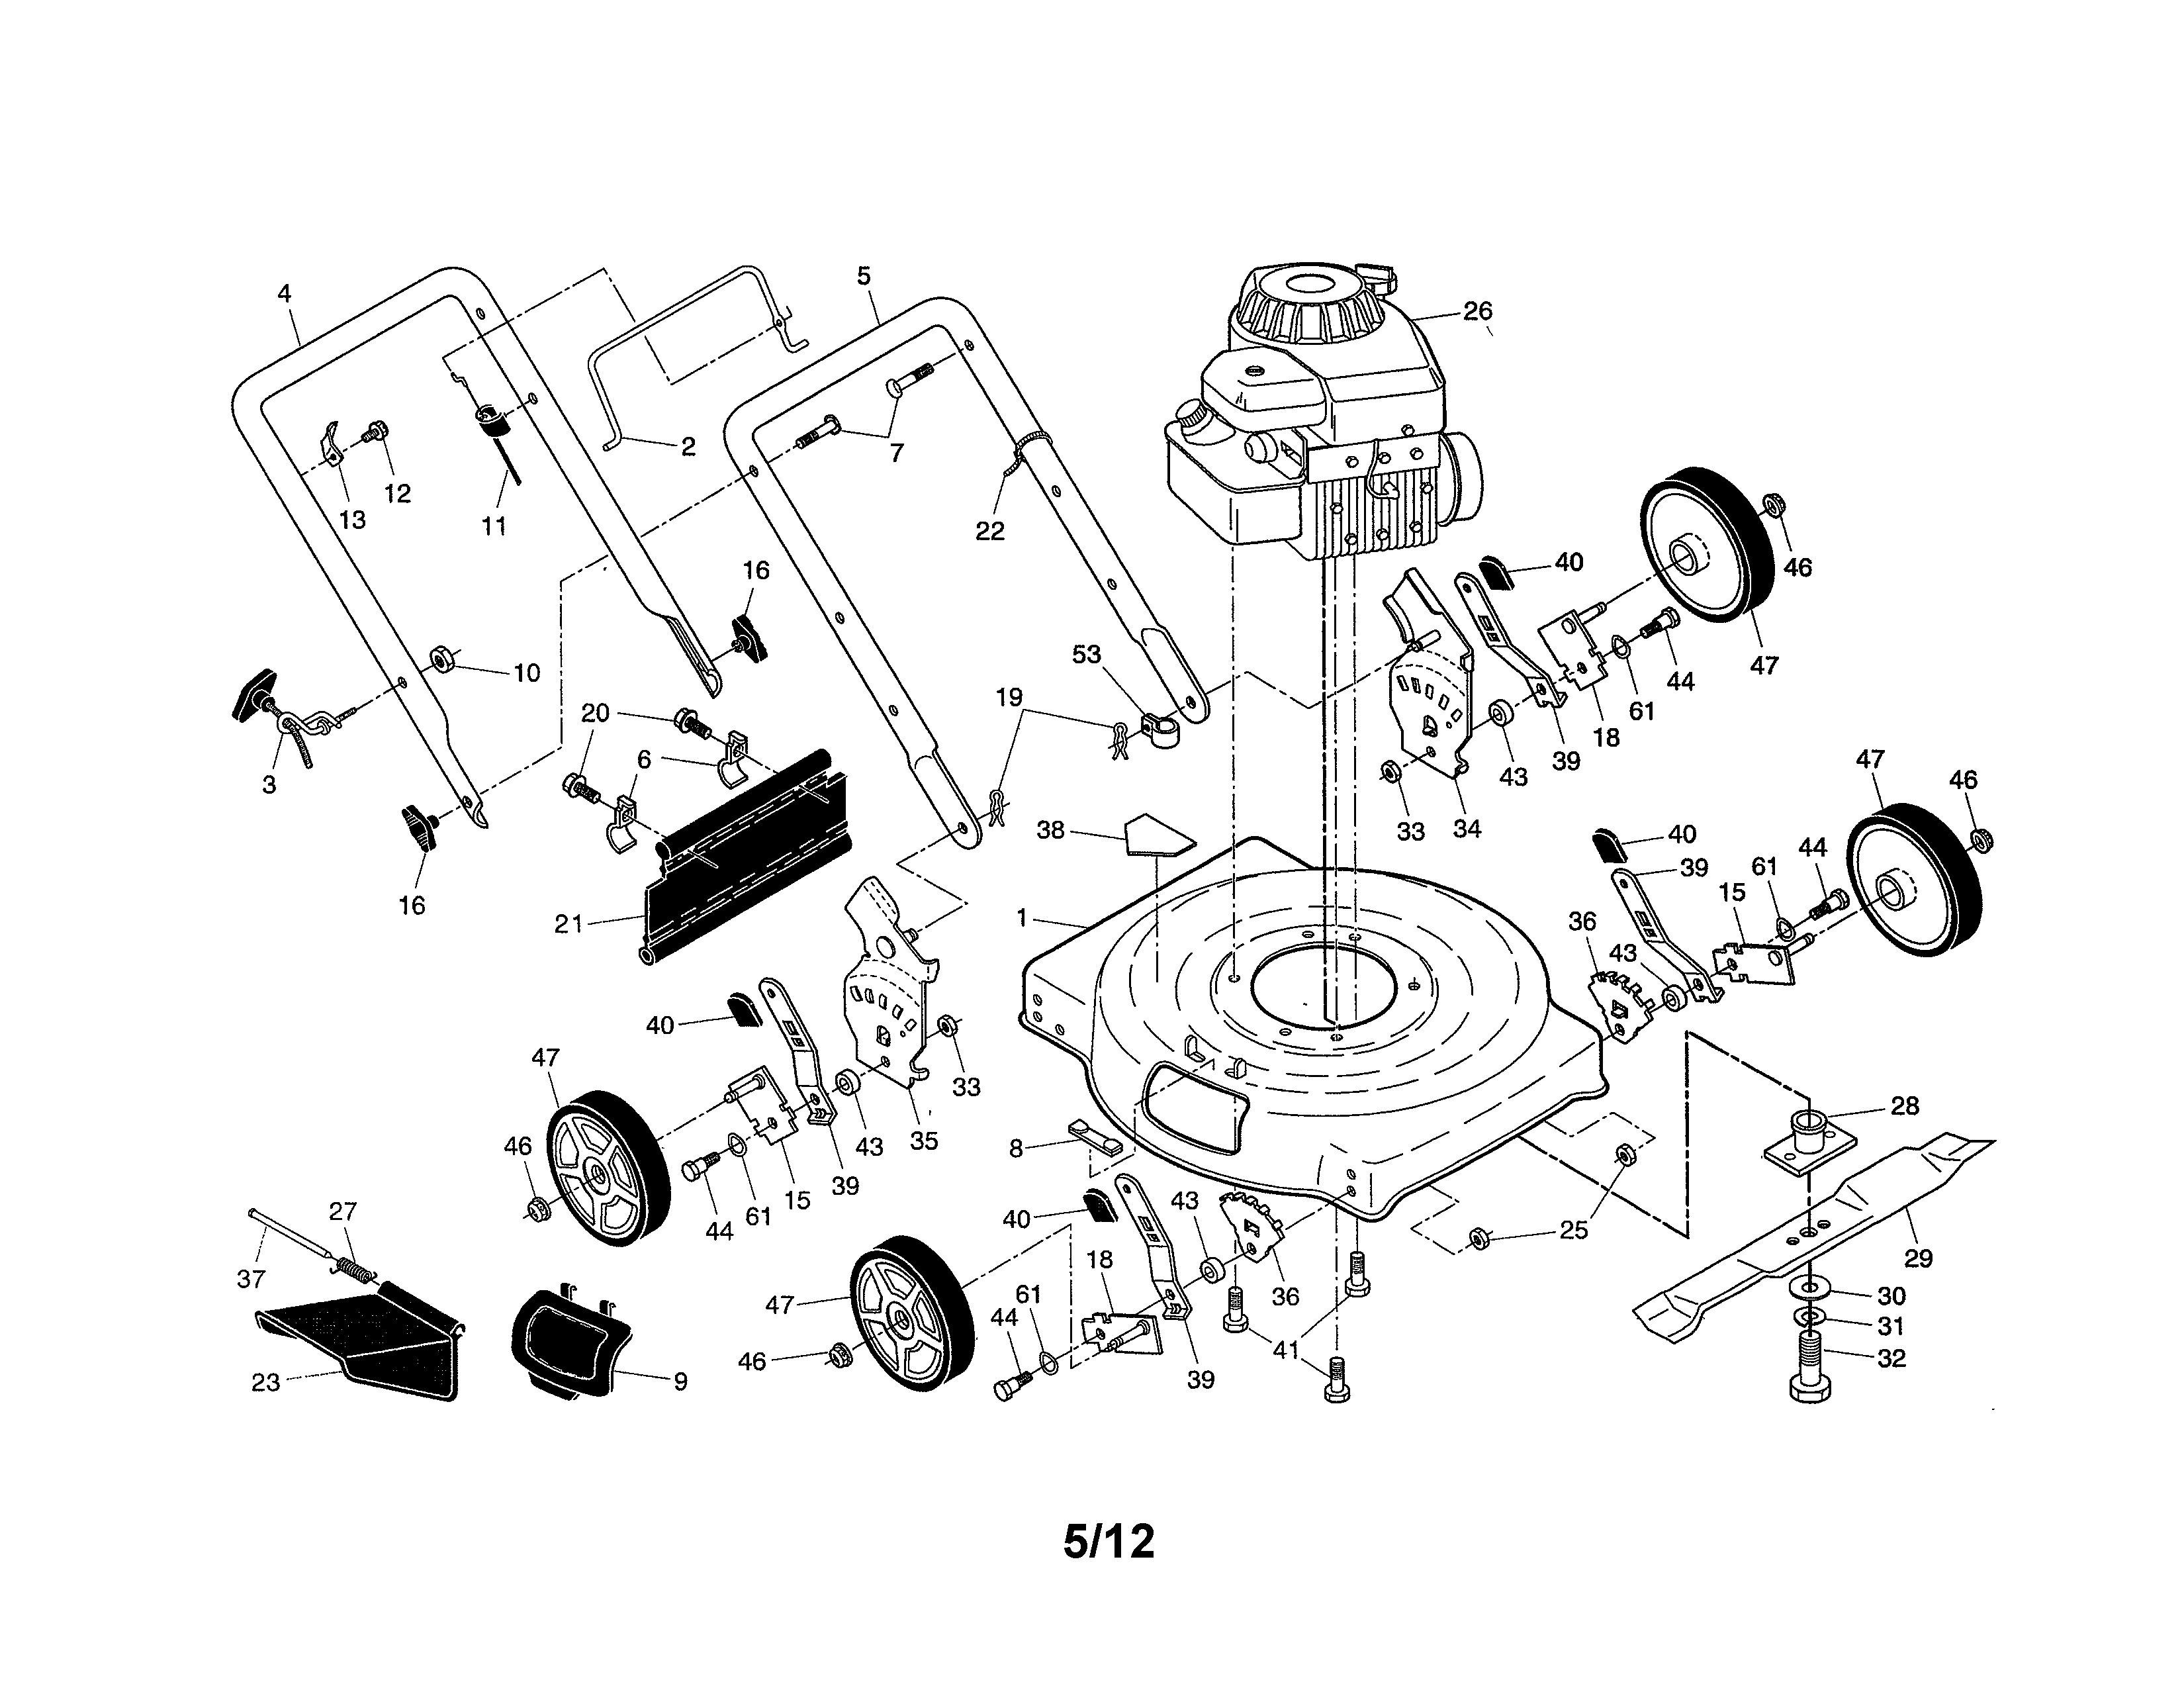 Weedeater Lawn Mower Parts